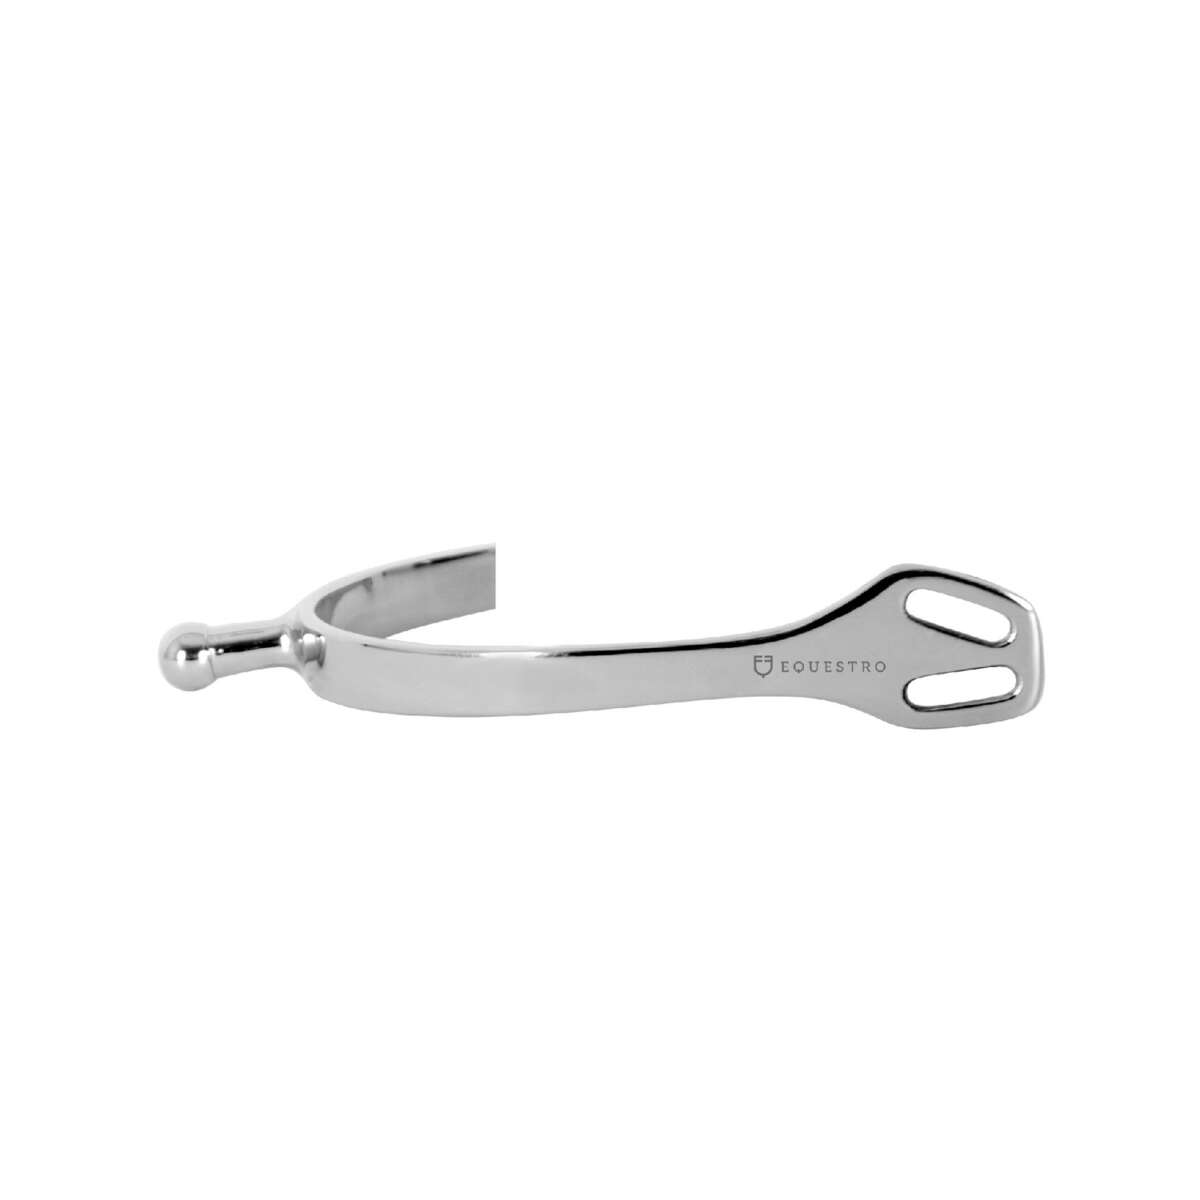 0037973_english-stainless-steel-drop-spurs_sr00601-2